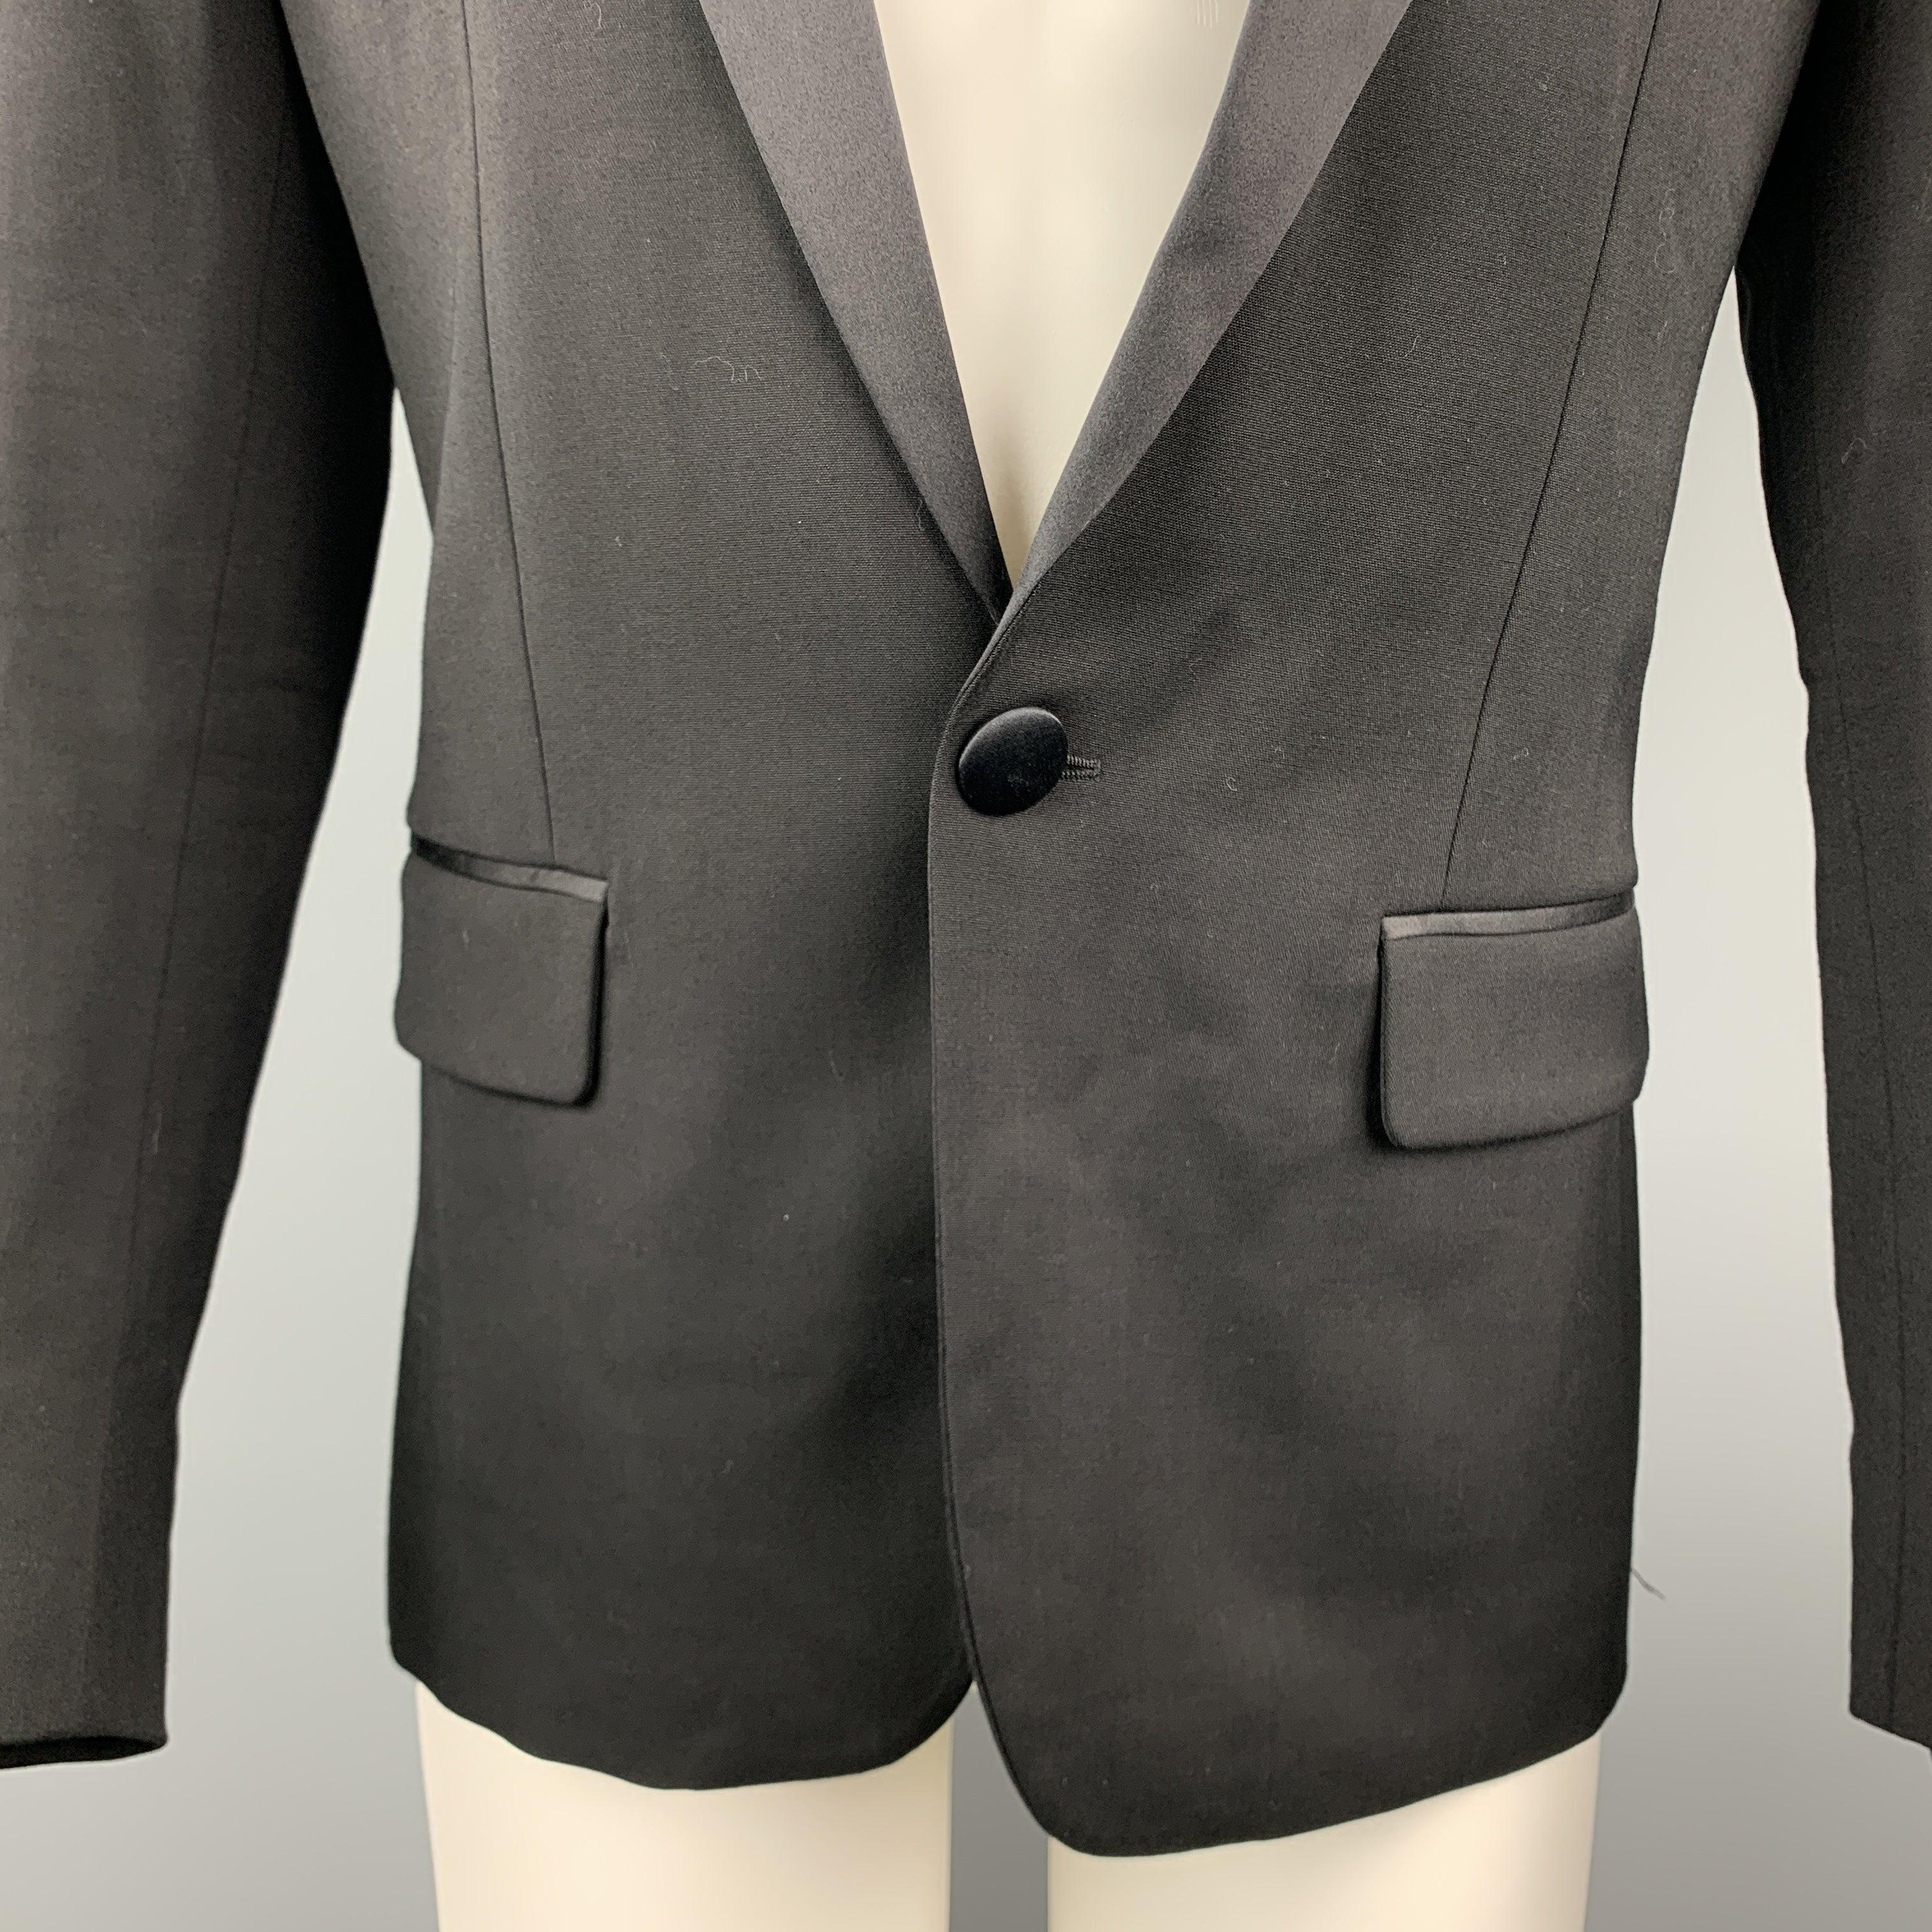 DSQUARED2 Size 40 Black Wool Blend Satin Peak Lapel Tuxedo Jacket In Excellent Condition For Sale In San Francisco, CA